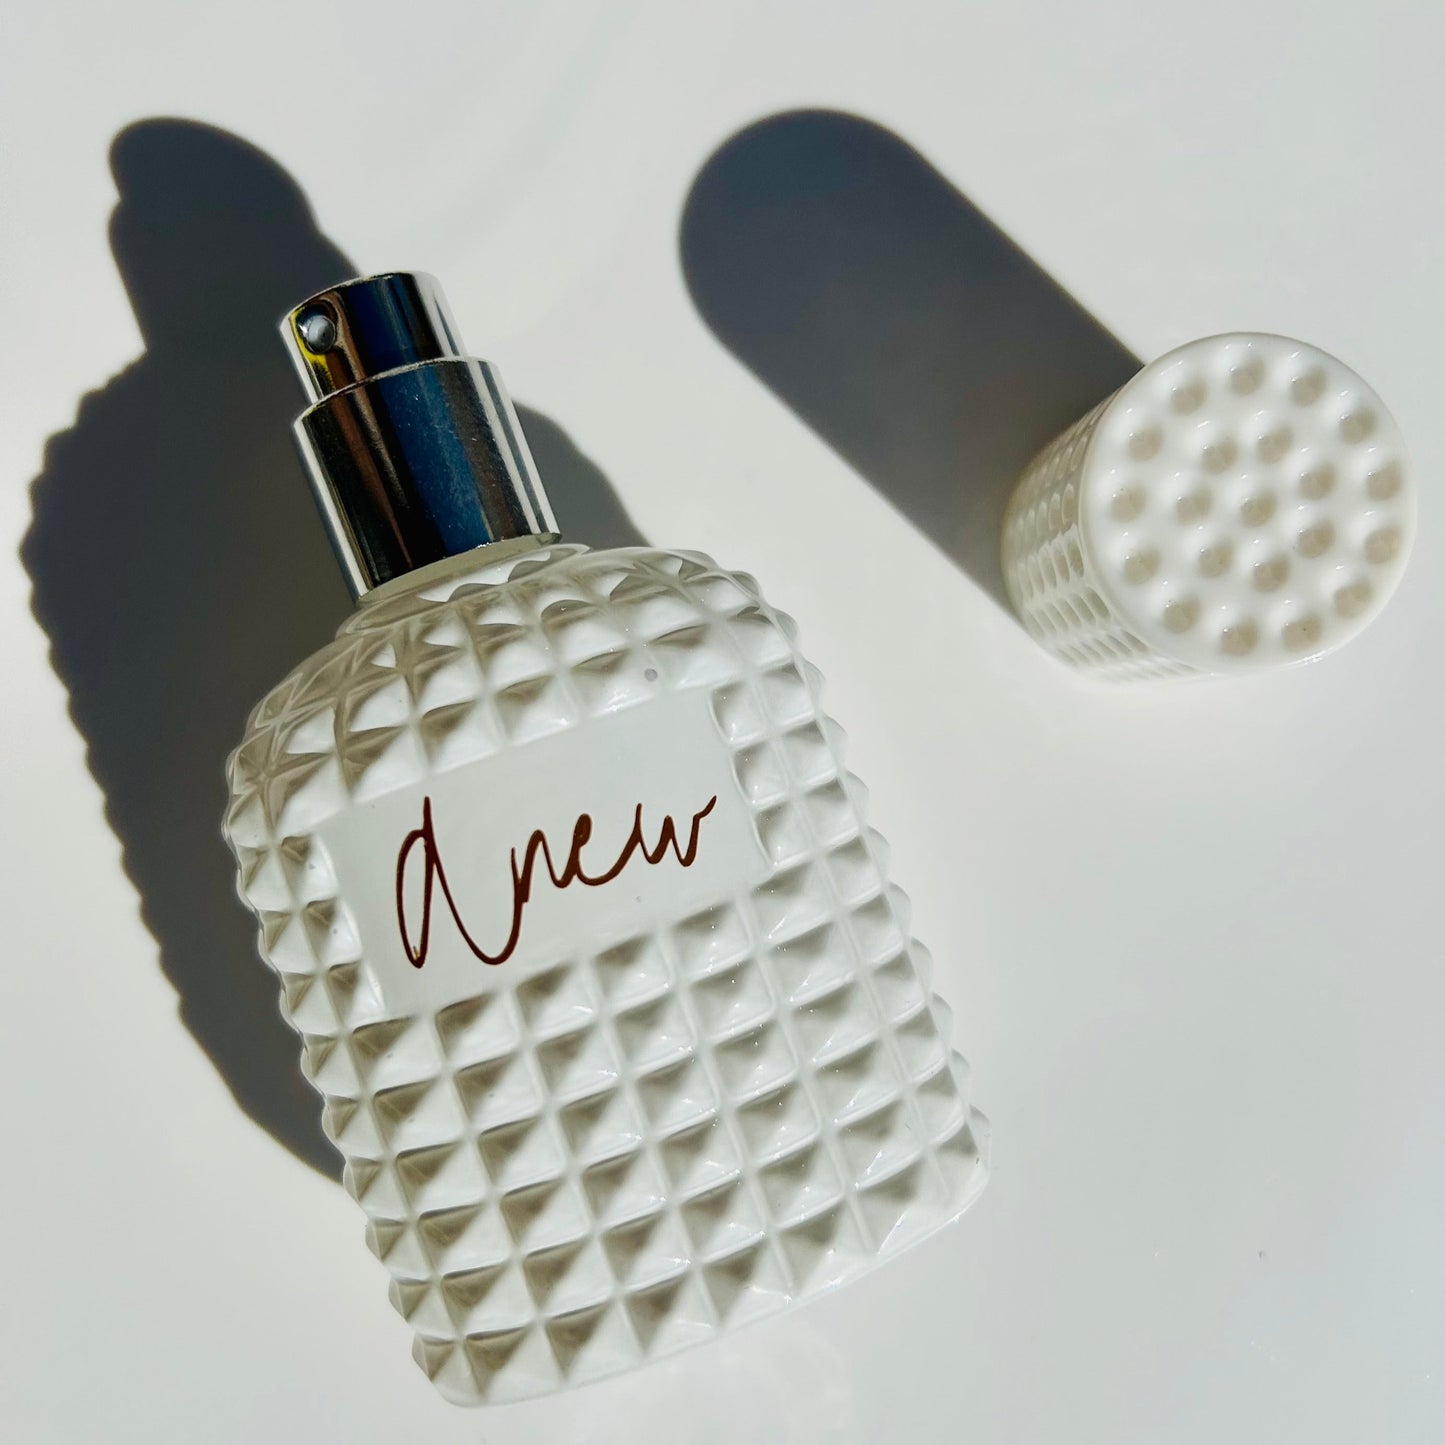 Anew Fragrance